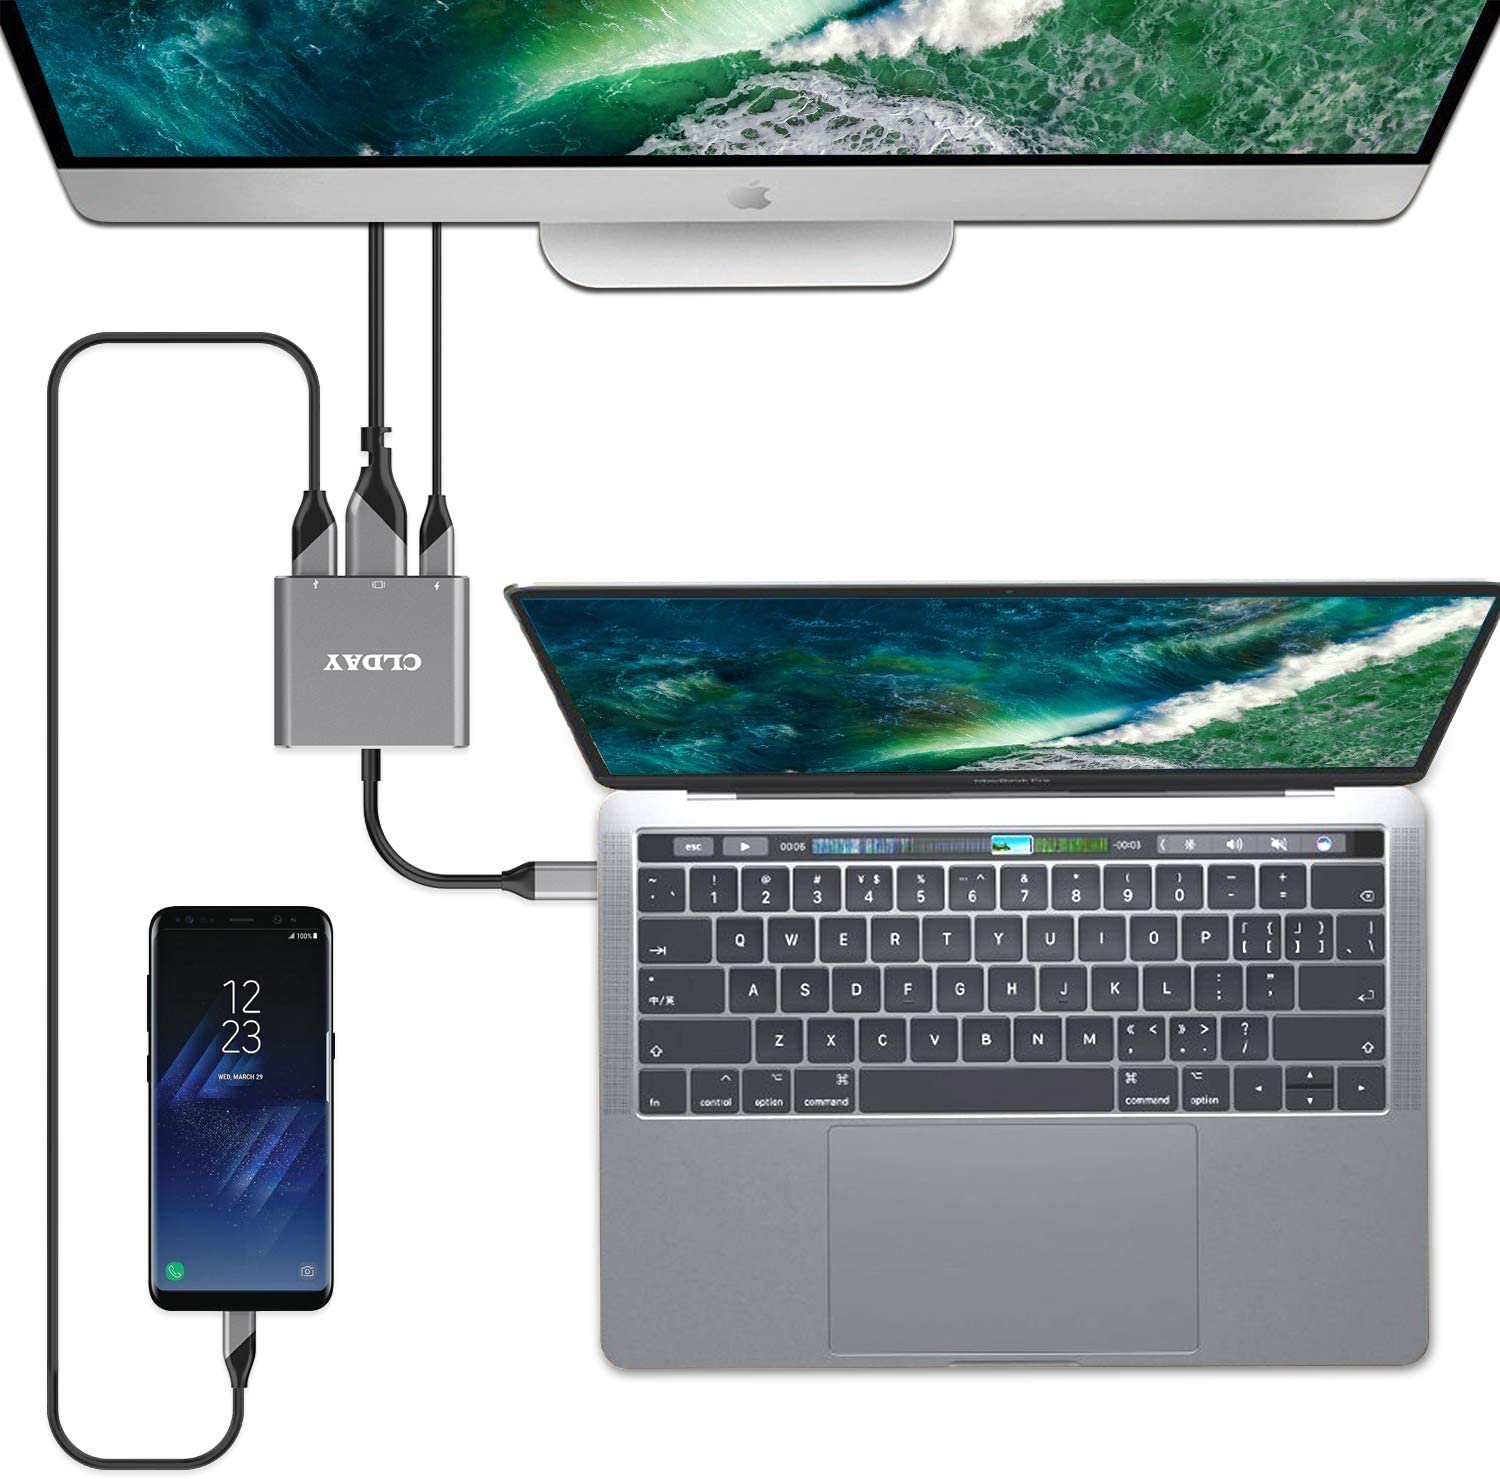 USB-C to HDMI Adapter, 4K CLDAY USB Type-C (Thunderbolt 3 Compatible) Multiport Hub